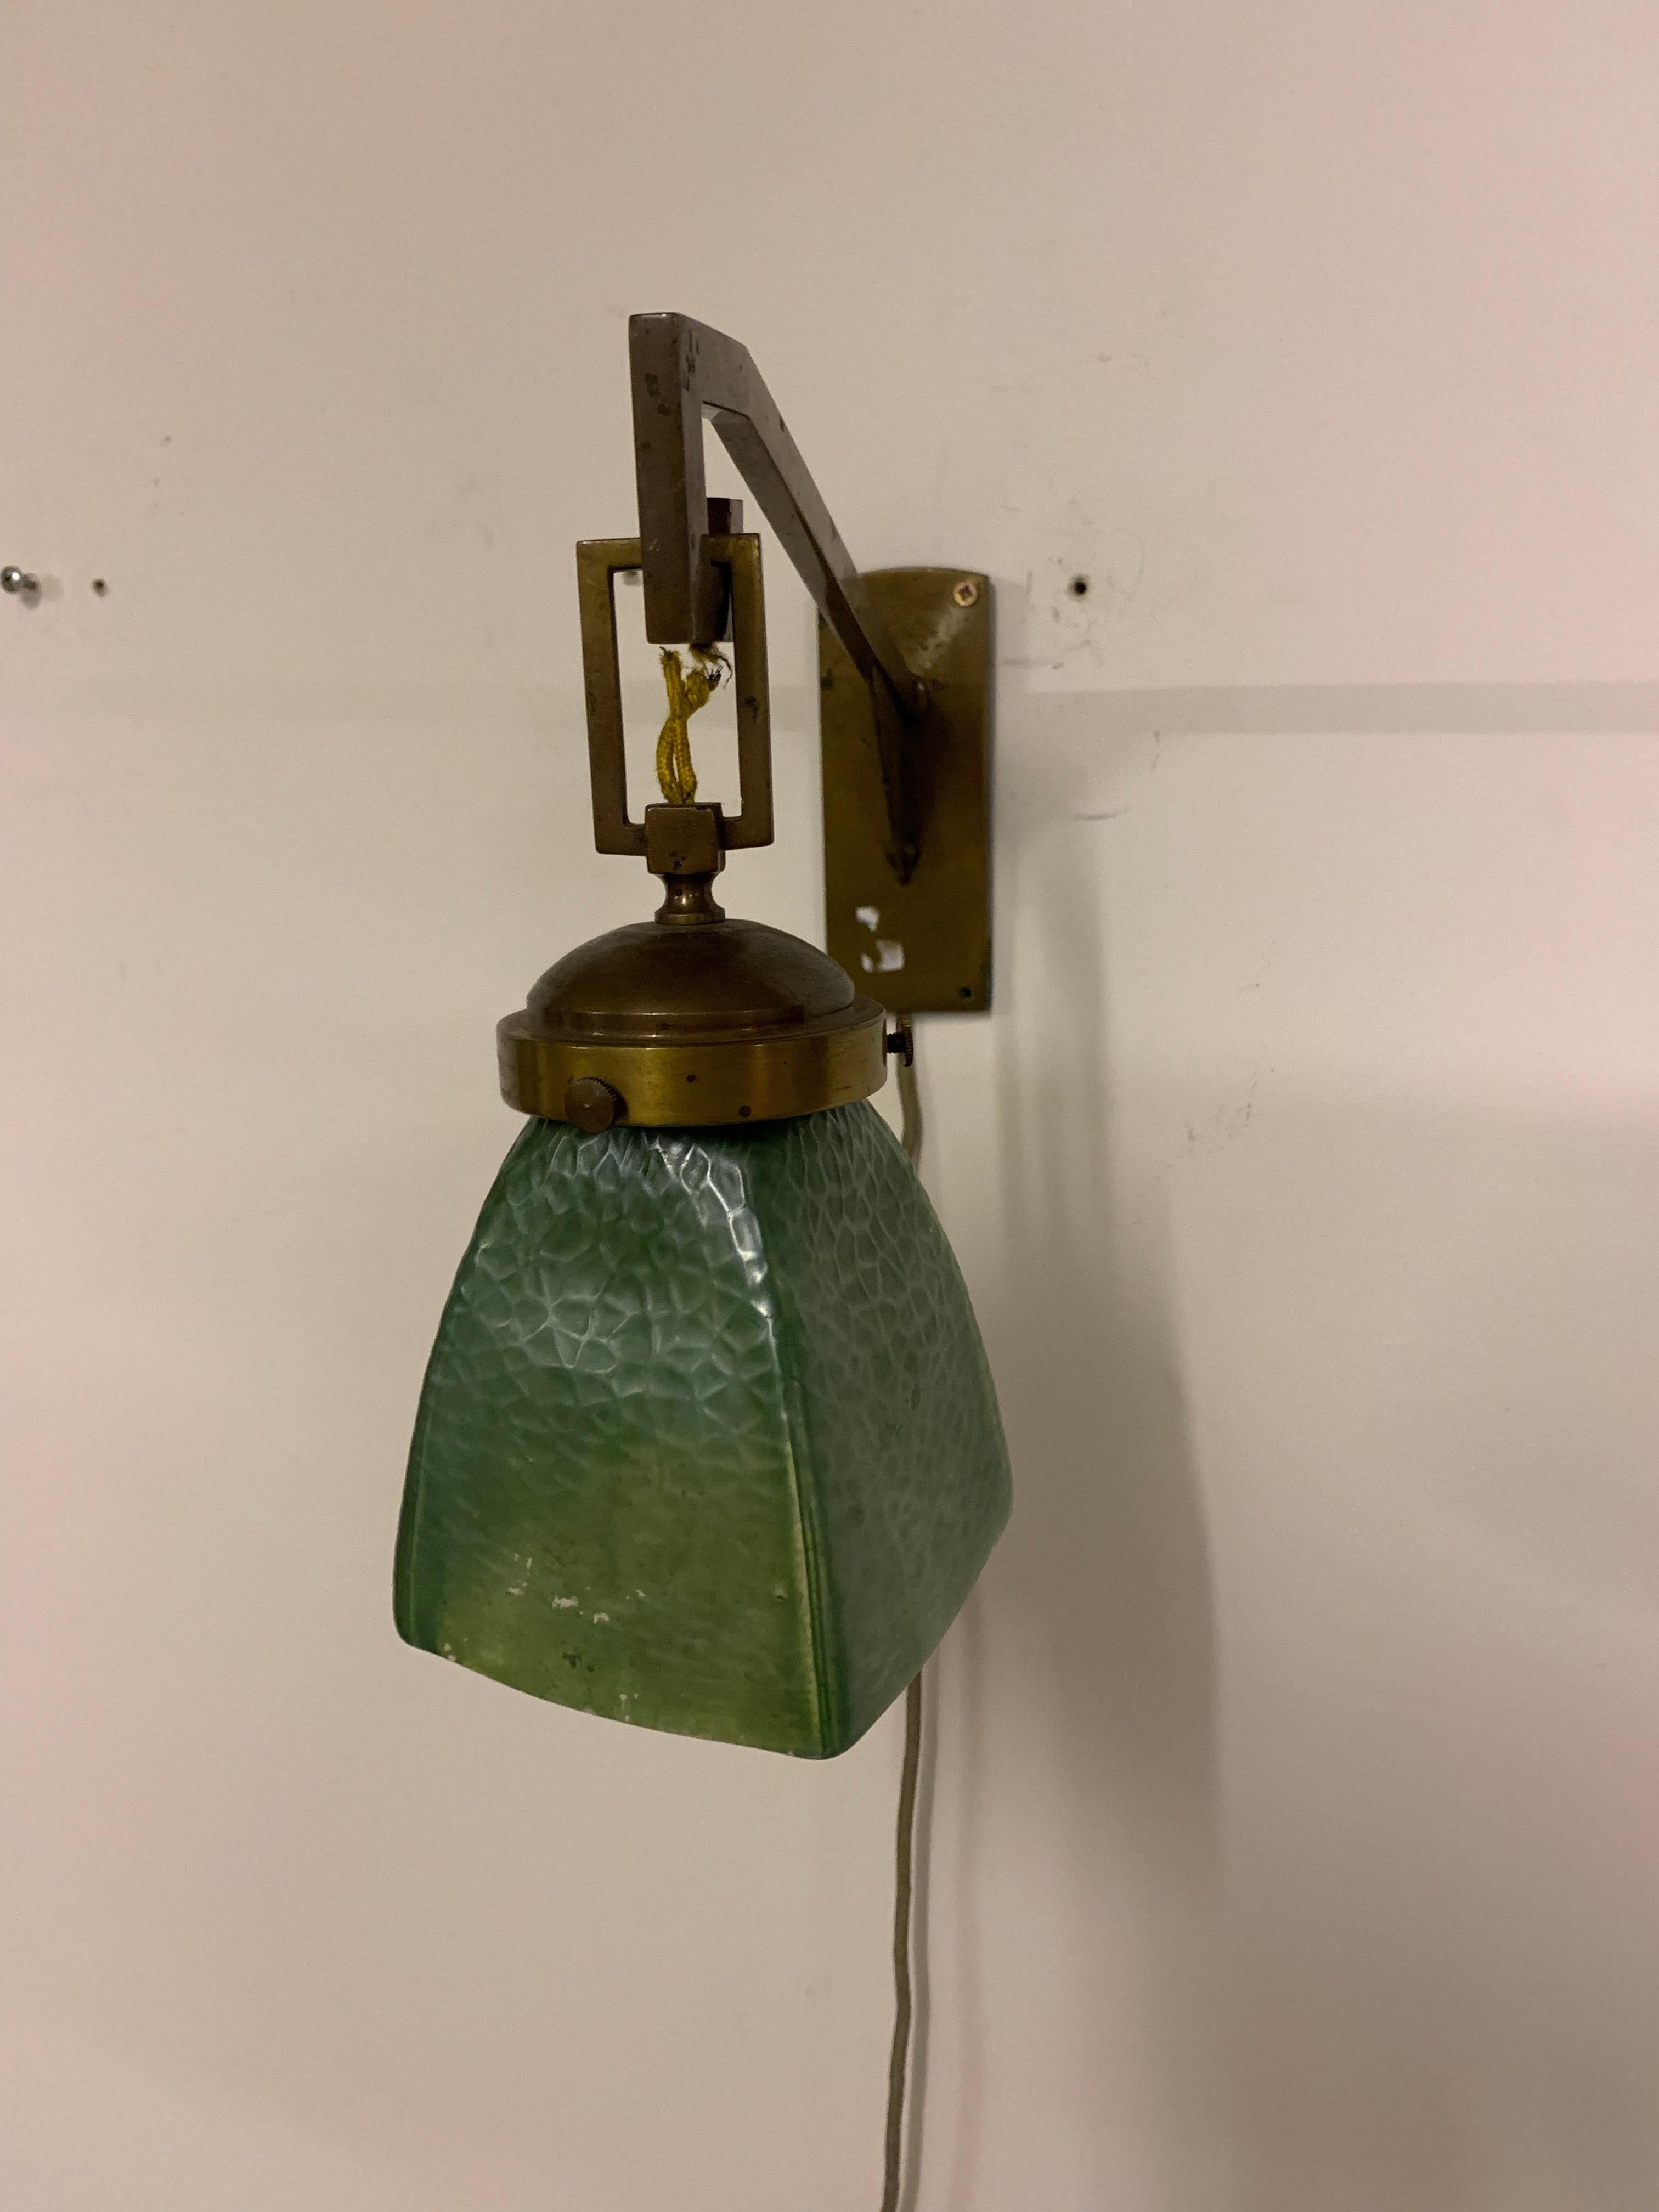 Wonderful Art Nouveau wall lamp by Loetz. Typical design of it´s age. Needs new wiring.